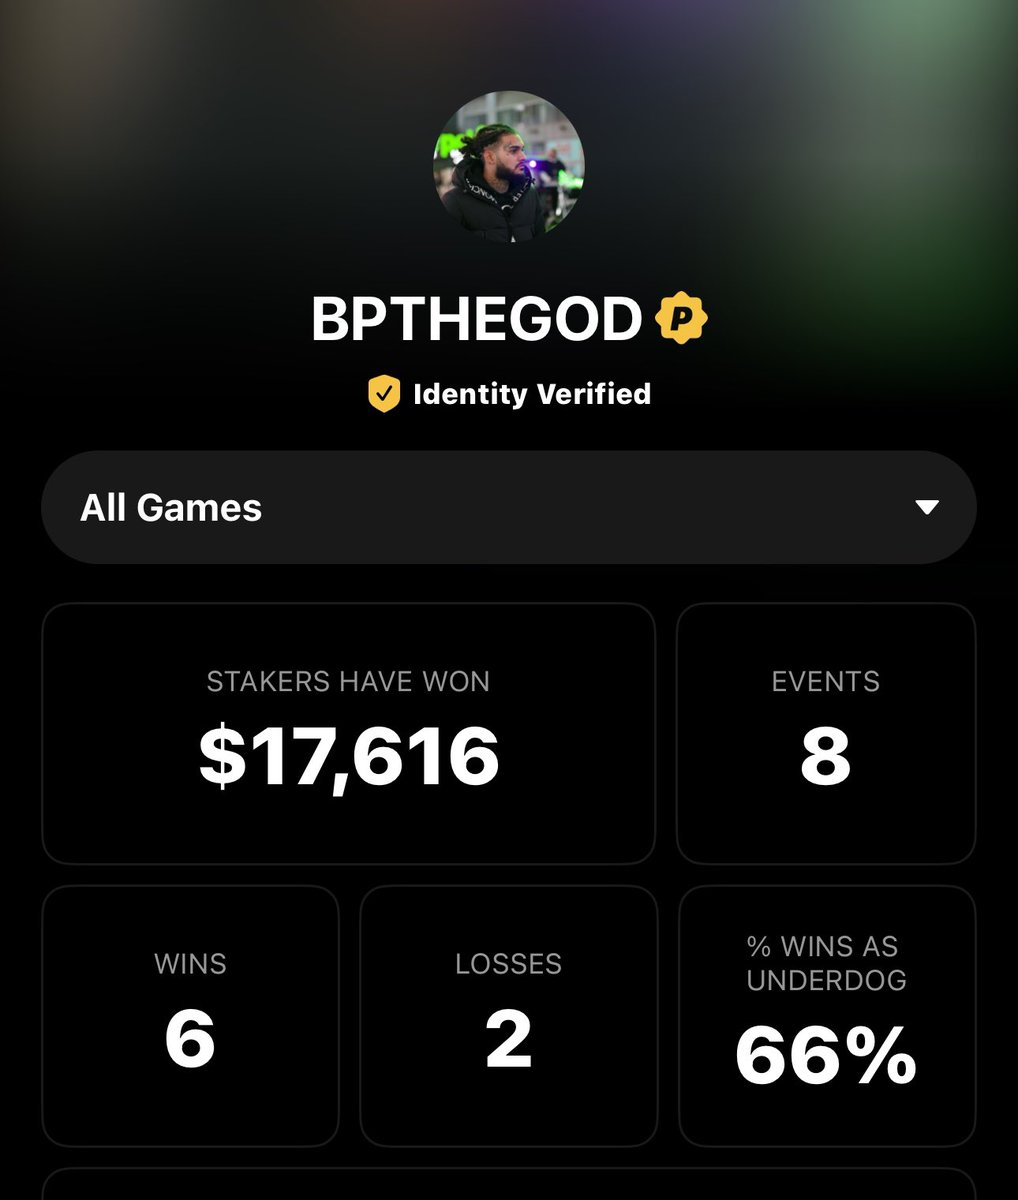 2 weeks in 💪🏽 Join me on 1v1Me and get $10 free with your first stake. Use my link or code BPTHEGOD when you sign up 1v1.me/bpthegod